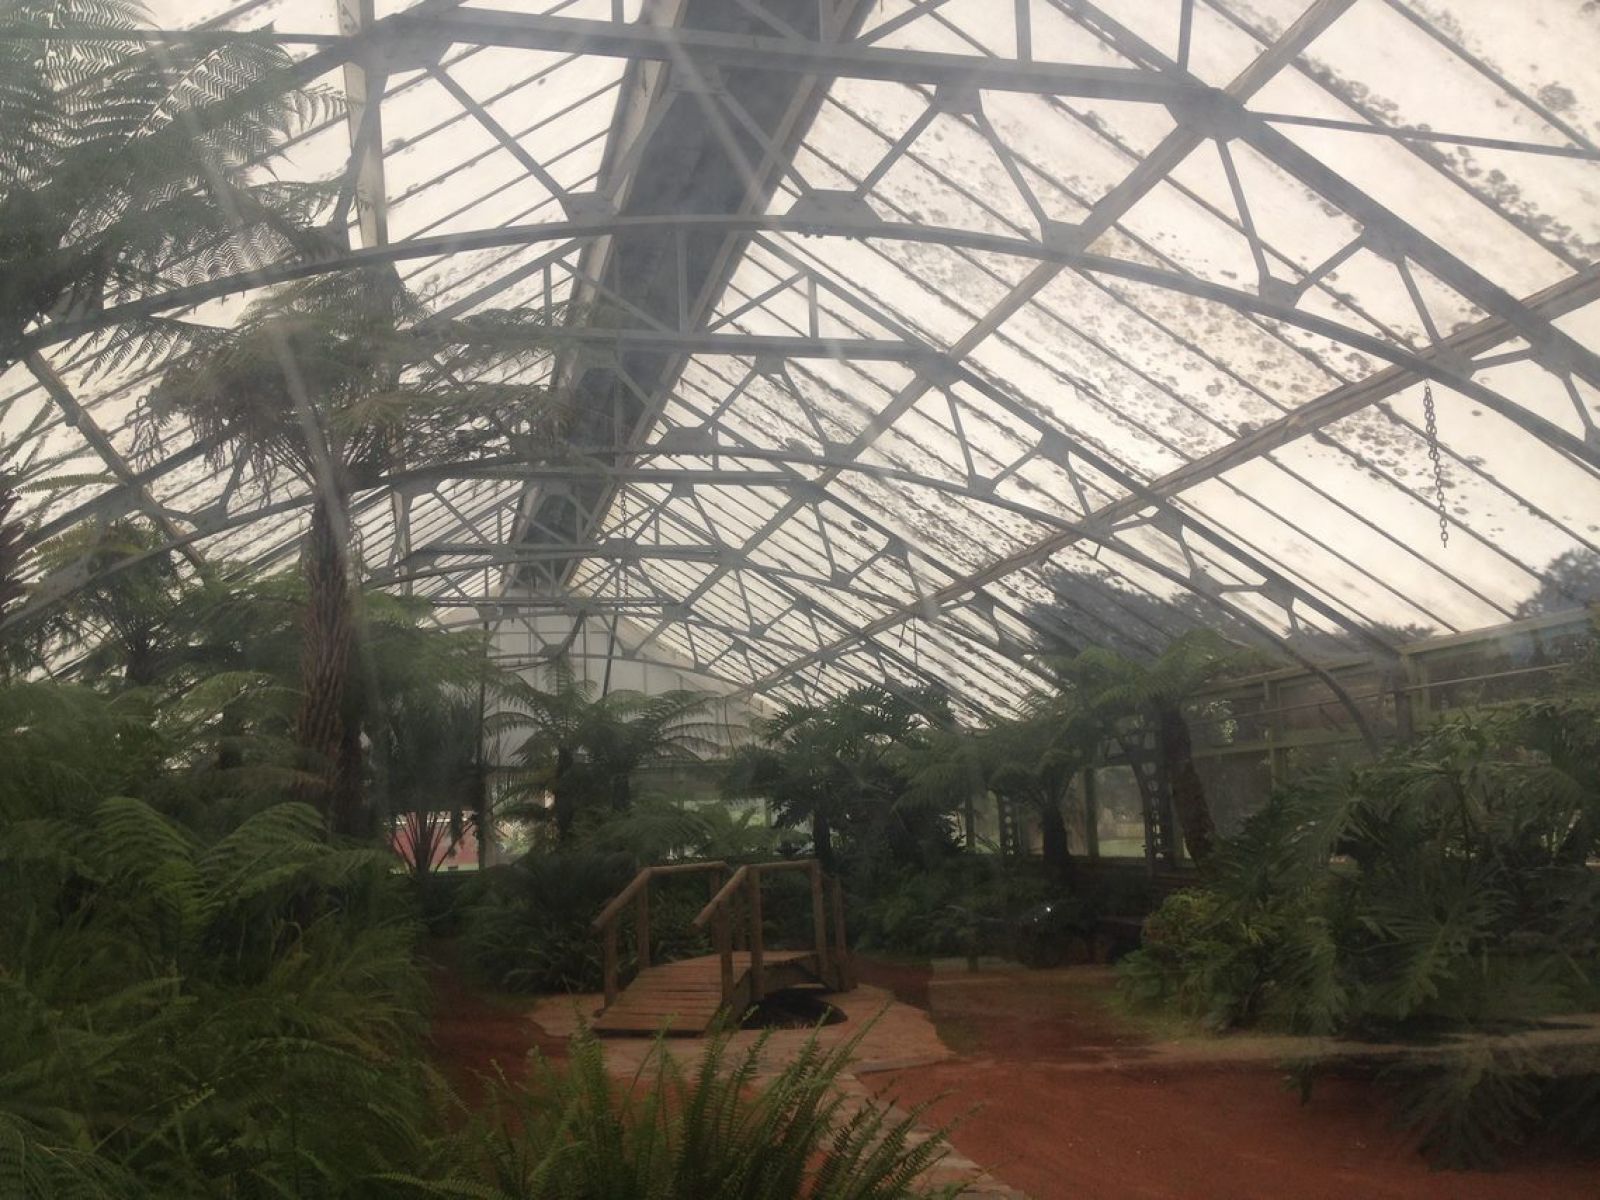 Ferns can be seen in the image with a bridge in the middle of the conservatory.